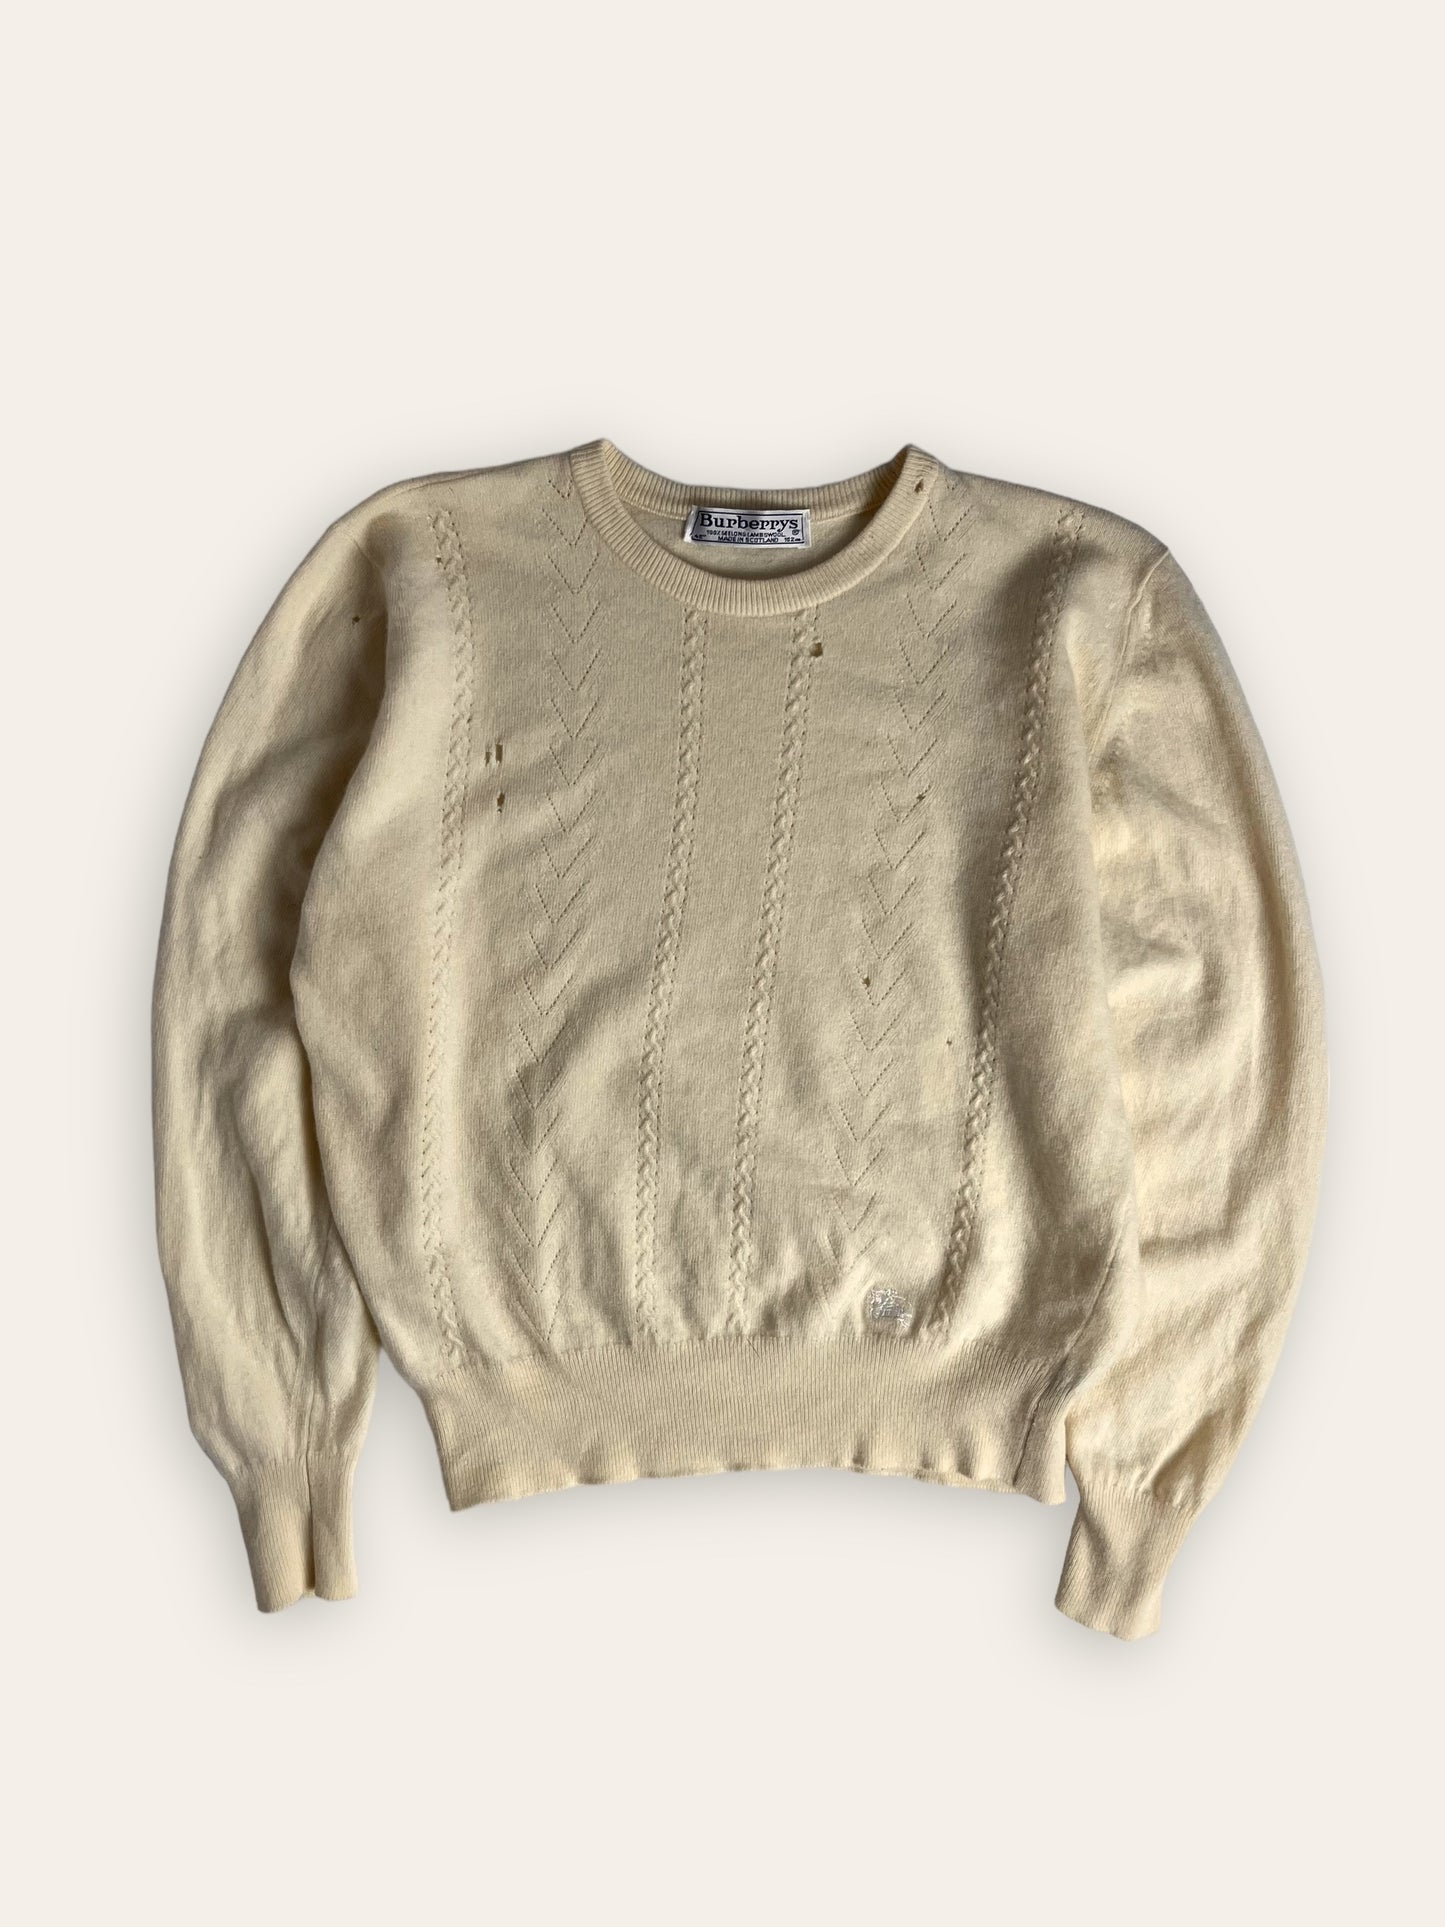 Burberry 90s Lambswool Knit